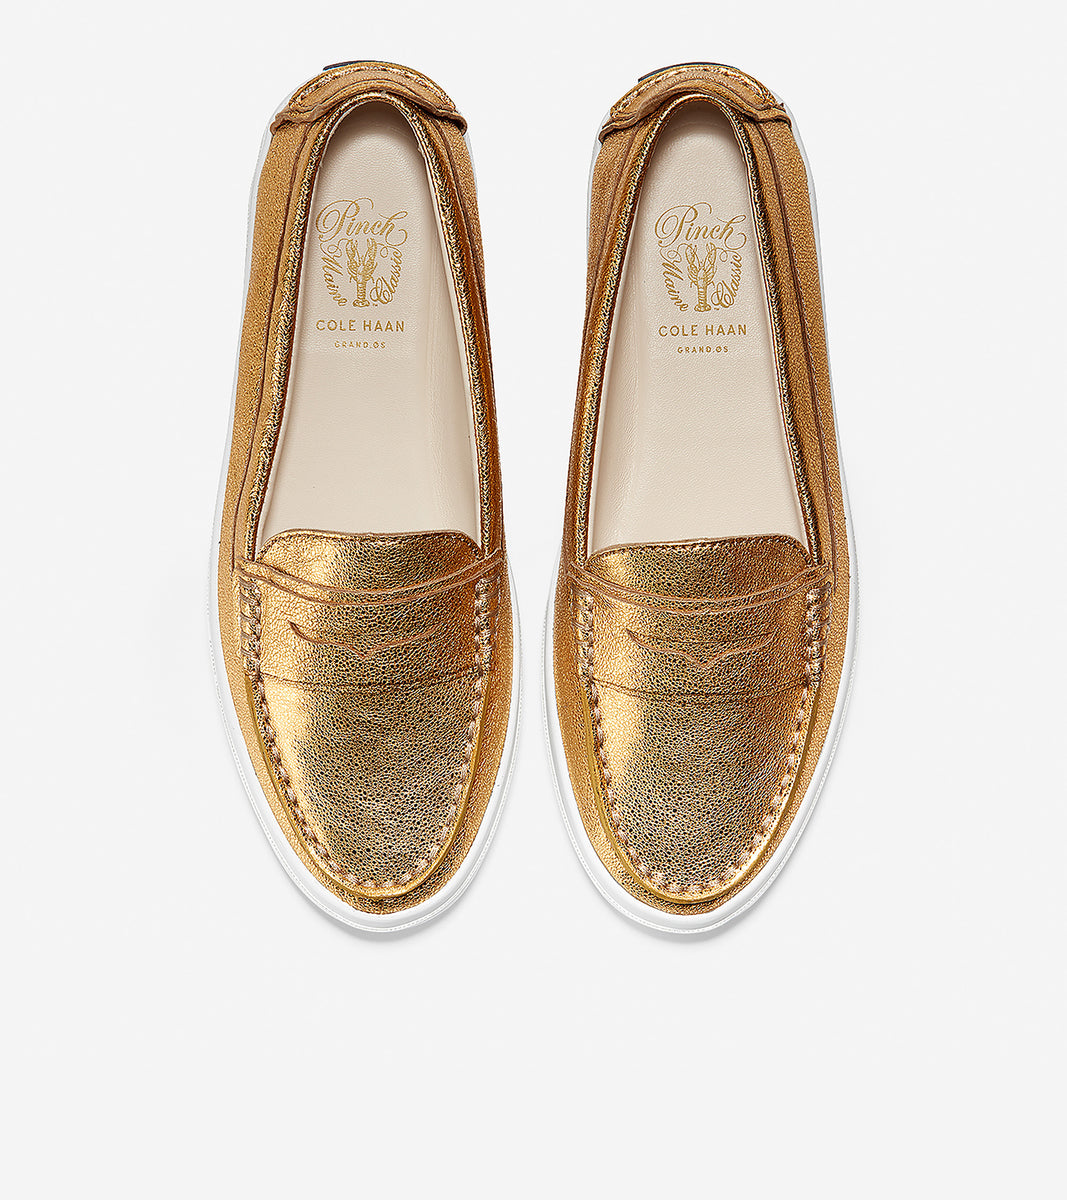 ColeHaan-Pinch Weekender LX Loafer-w10898-Gold Leather